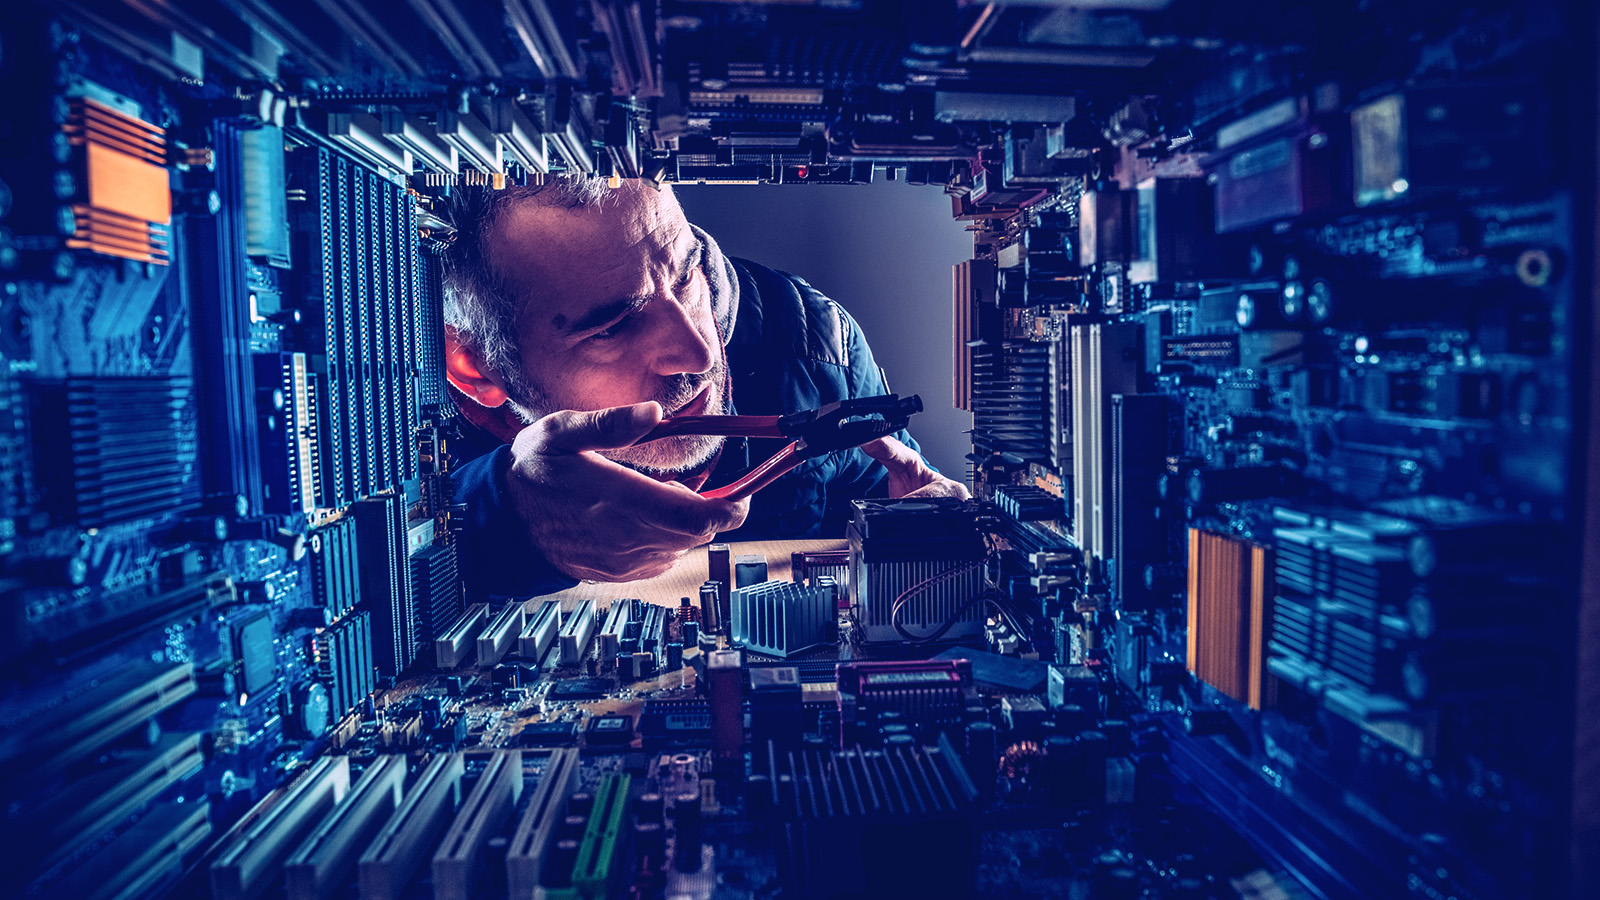 Man working on the inside of a machine/computer